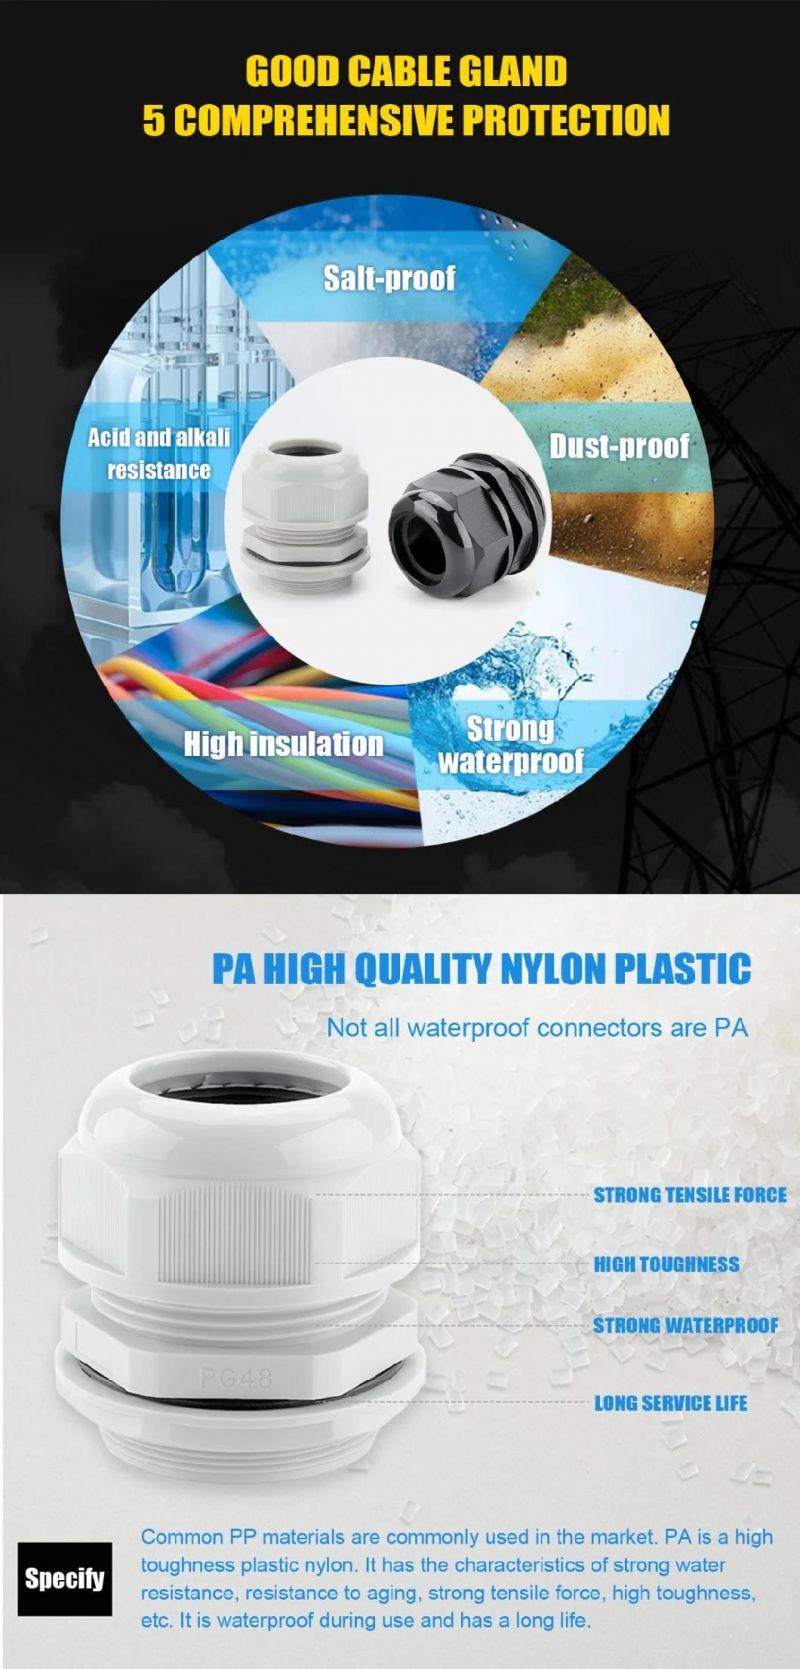 Pg/M Pg11 M20 Plastic Nylon Explosion Proof IP68 Cable Glands